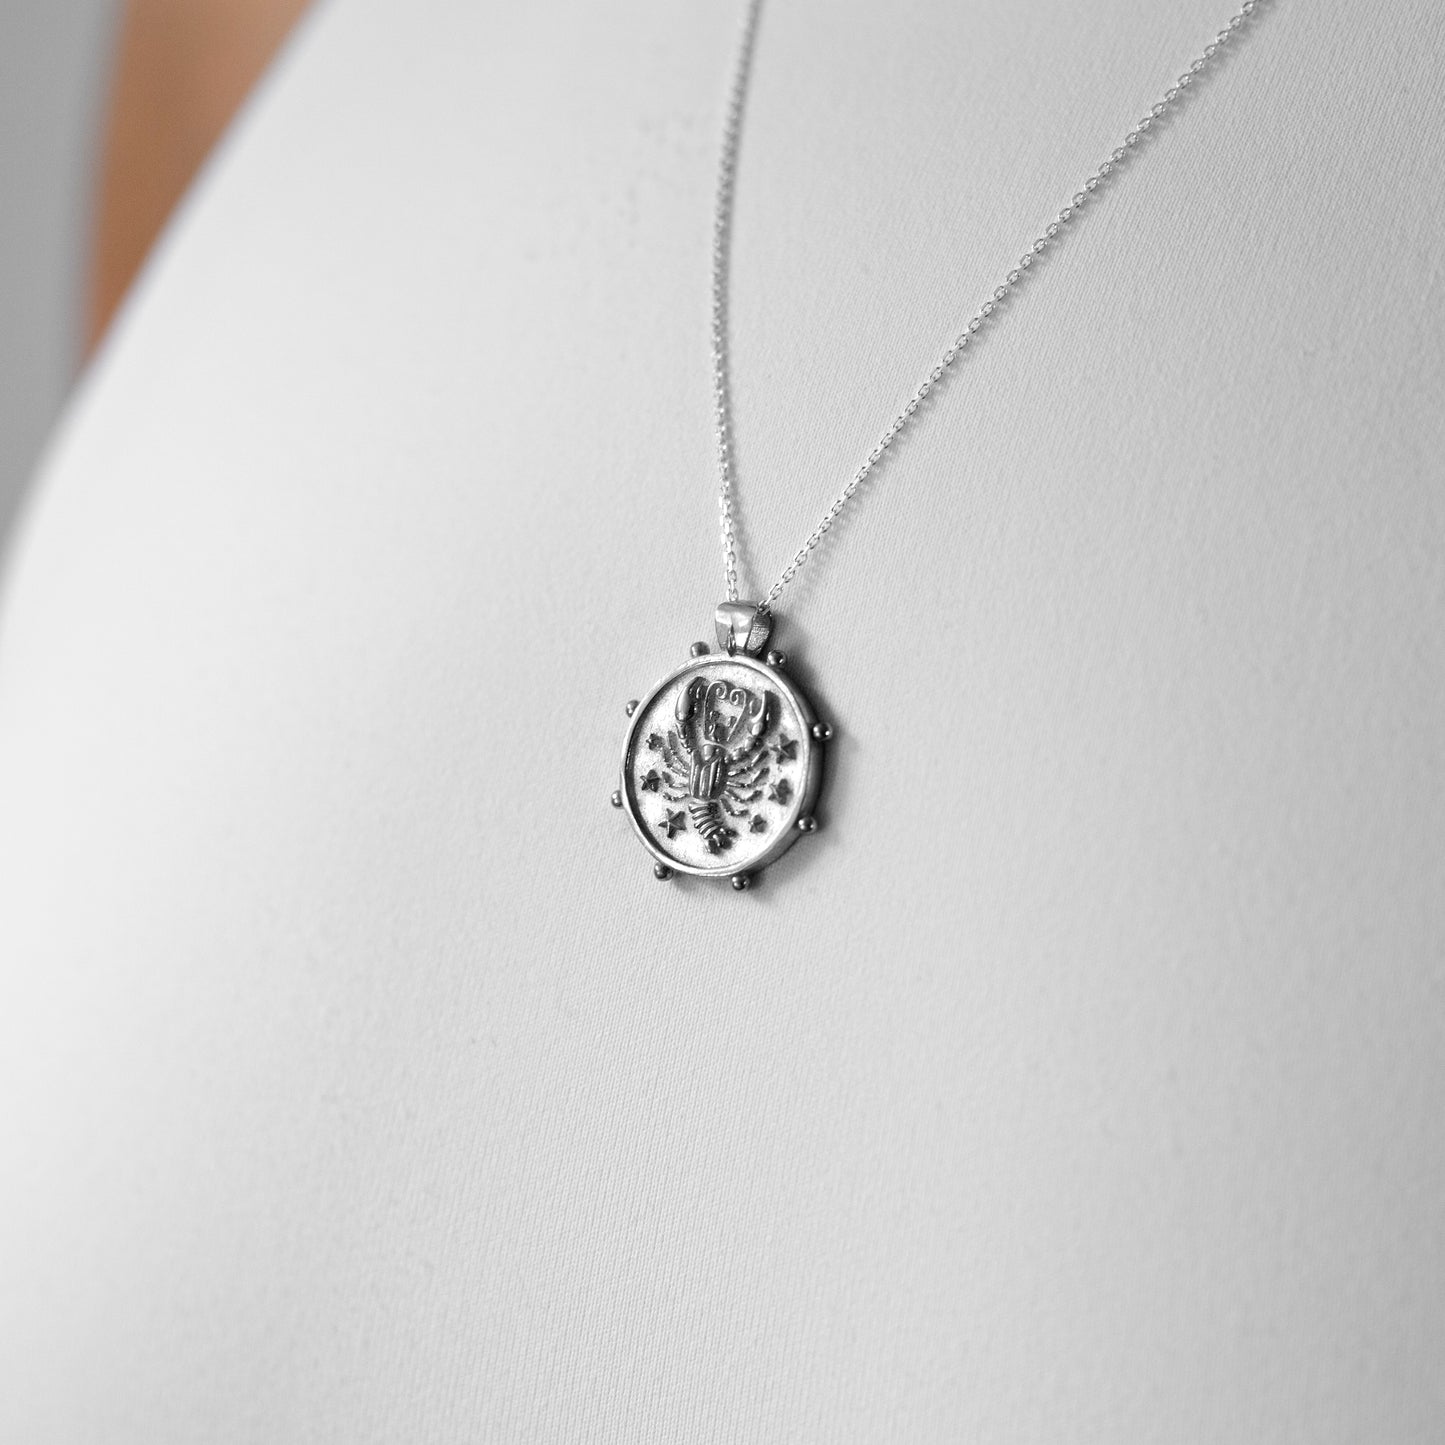 "Cancer" Pendant / 925 Sterling Silver